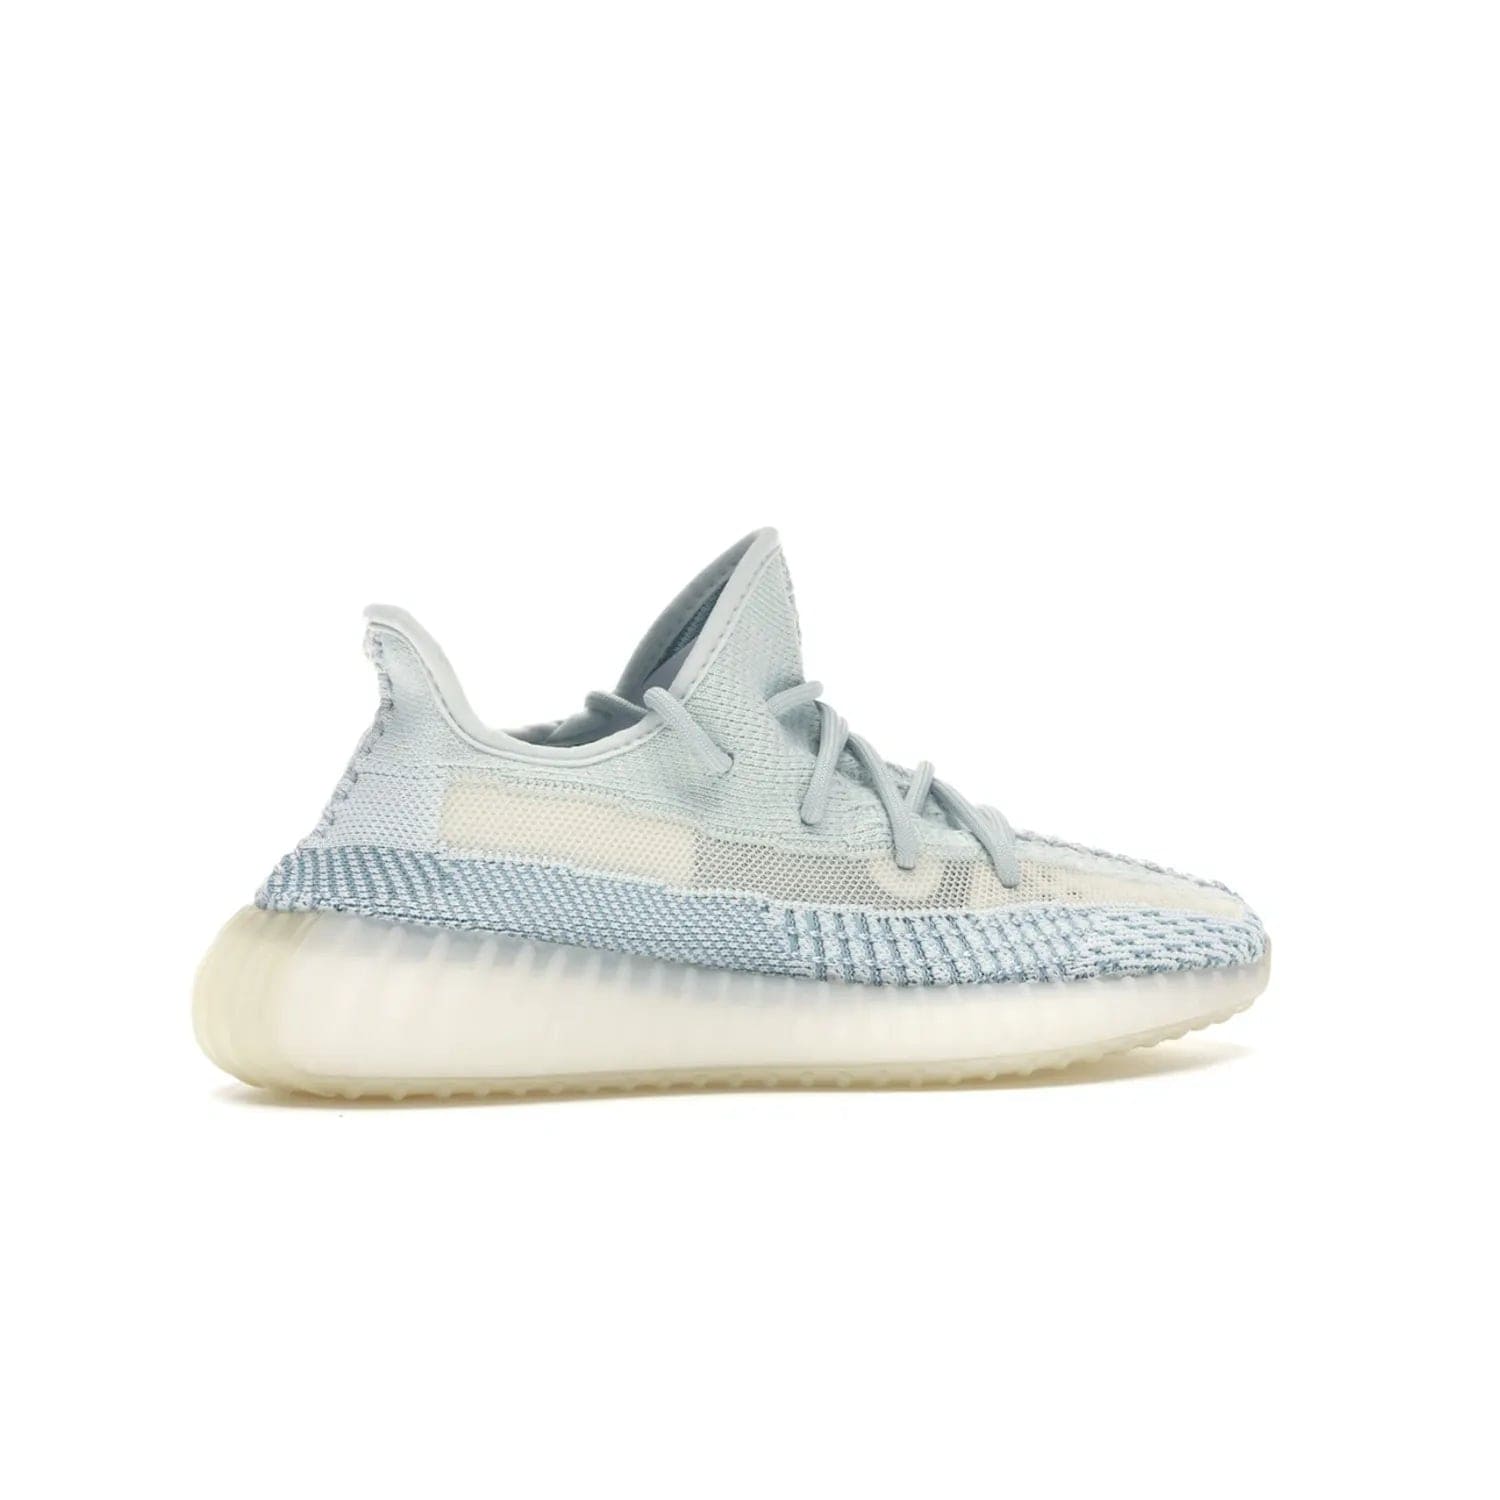 adidas Yeezy Boost 350 V2 Cloud White (Non-Reflective) - Image 35 - Only at www.BallersClubKickz.com - Adidas Yeezy Boost 350 V2 Cloud White (Non-Reflective) features Primeknit fabric and a unique, eye-catching design of cream, bluish-white, and transparent strip. Step out in timeless style with this eye-catching sneaker.